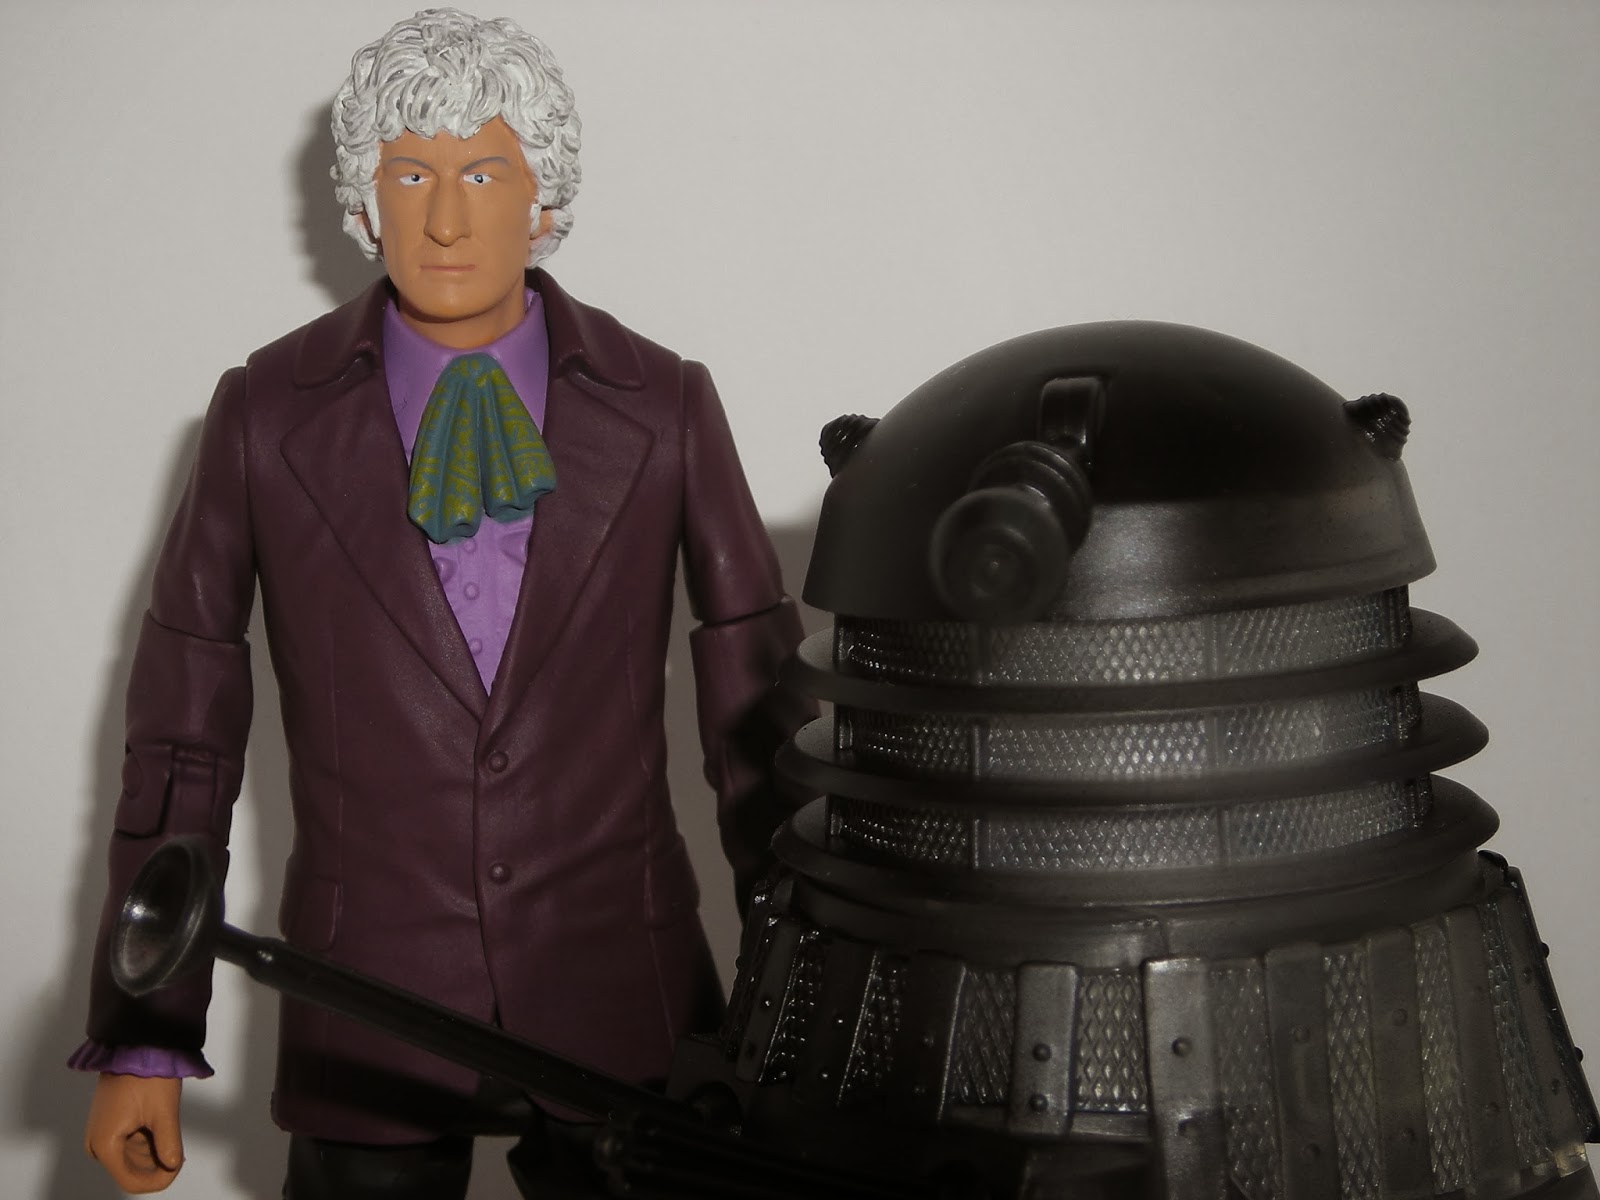 The third Doctor and Anti-Reflecting Light Wave Dalek